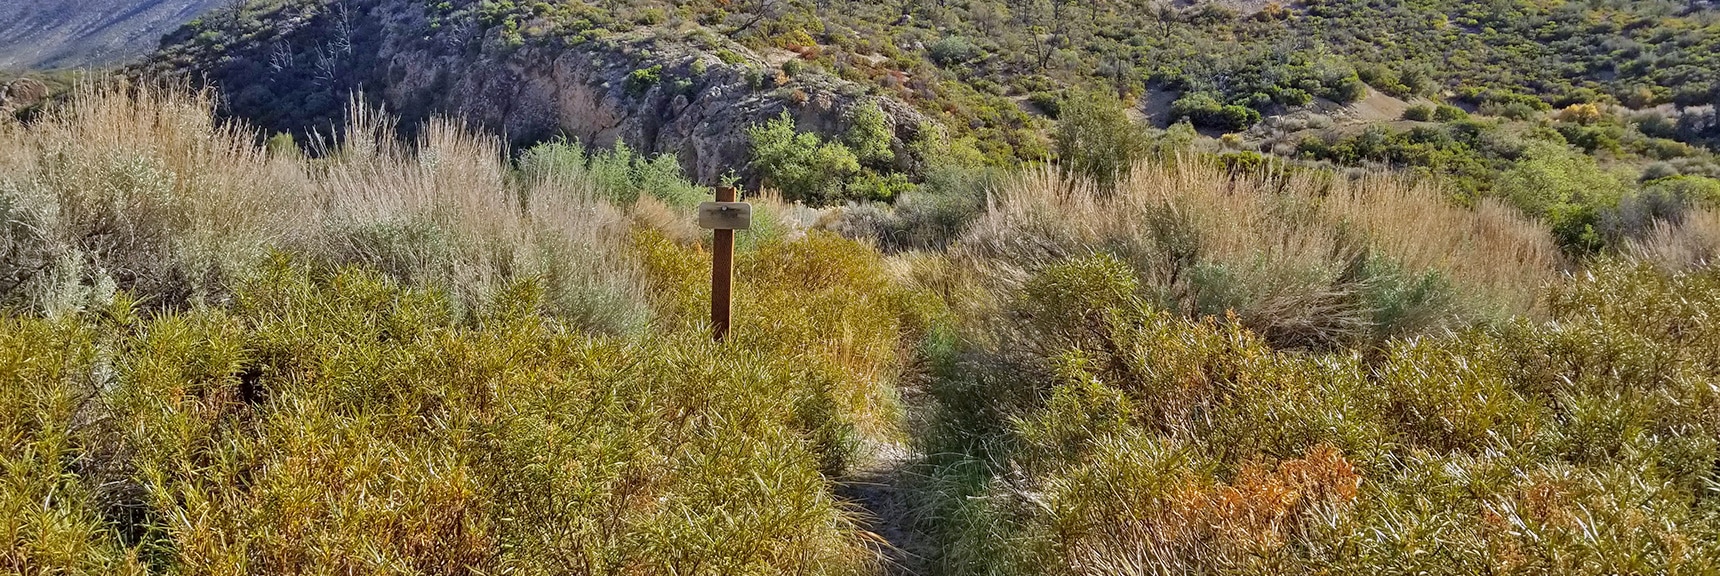 Lovell Canyon Trail Crosses Canyon Through Brush. | Harris Mountain from Lovell Canyon Nevada